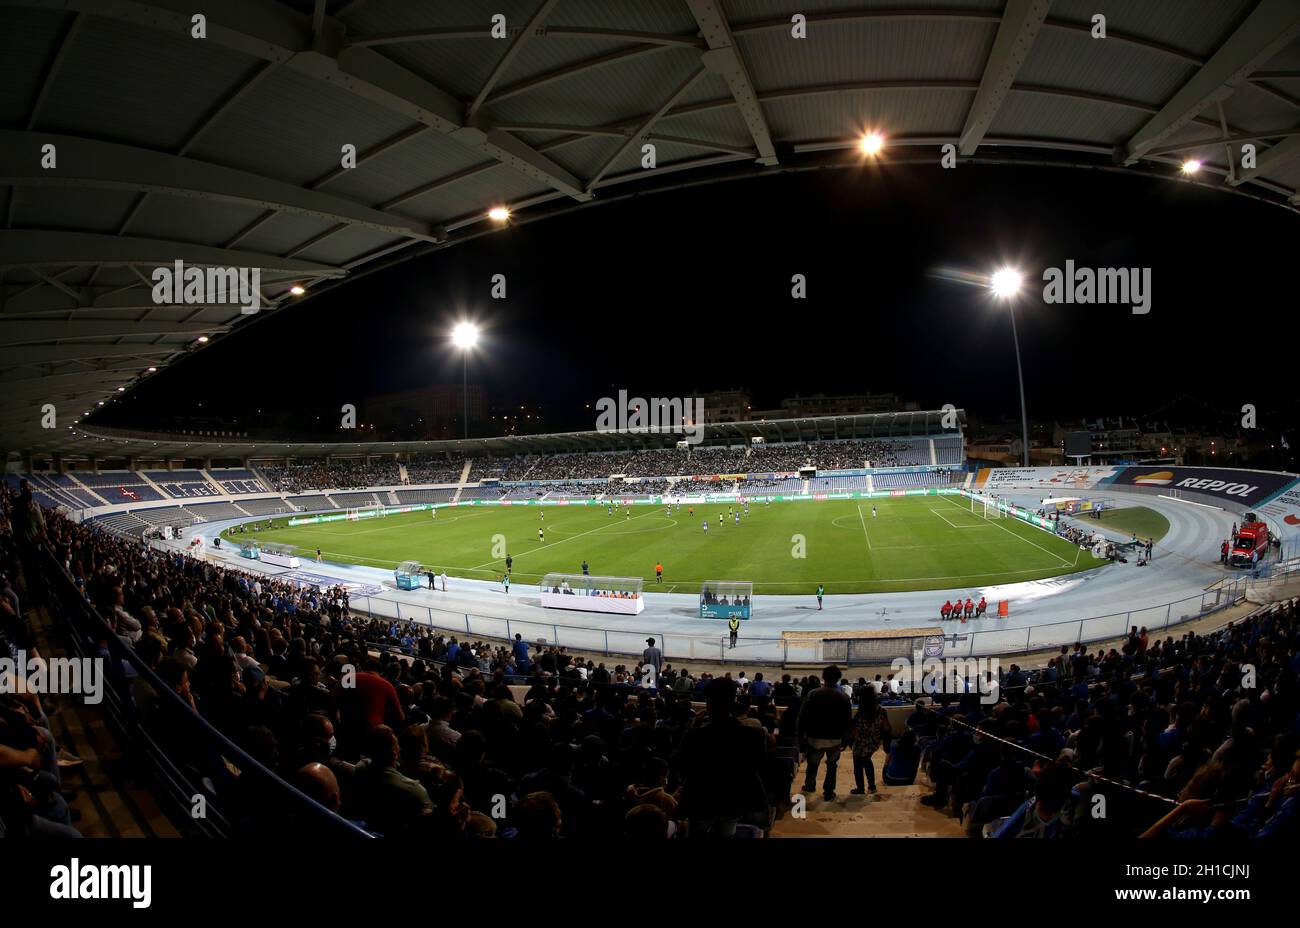 LISBON, PORTUGAL - OCTOBER 15: Panoramic View of Estadio do Restelo ,during the Portuguese Cup match between Os Belenenses and Sporting CP at Estadio do Restelo on October 15, 2021 in Lisbon, Portugal. (MB Media) Stock Photo